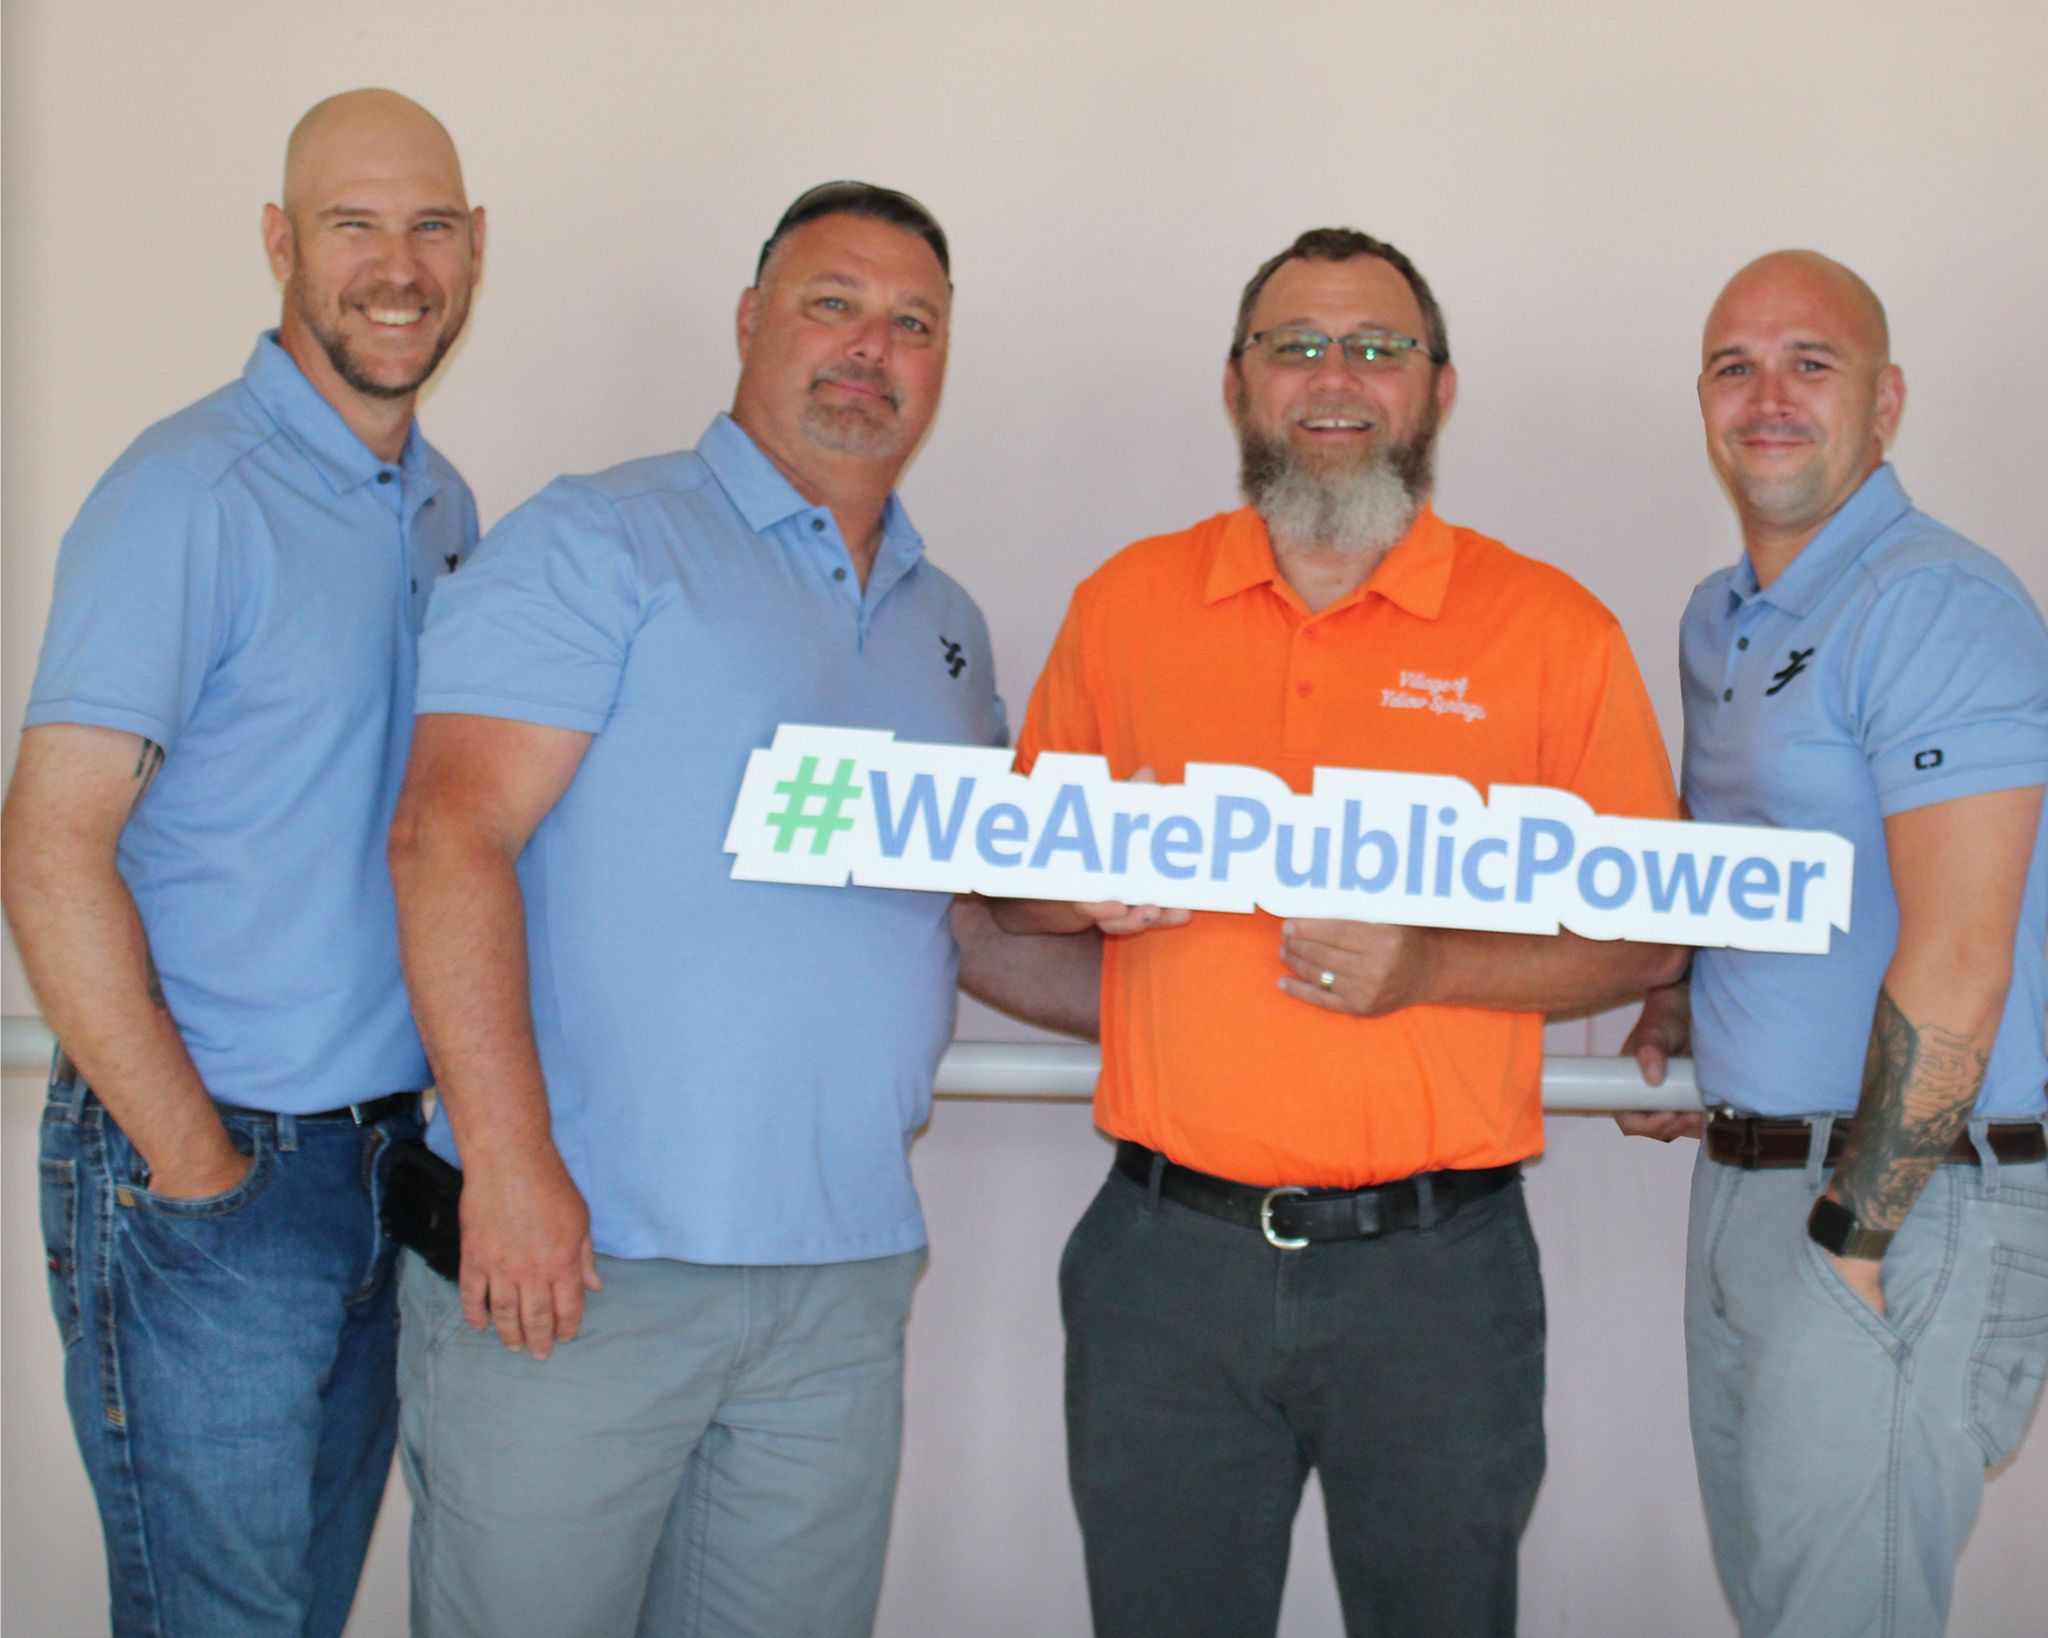 We are public power 2022